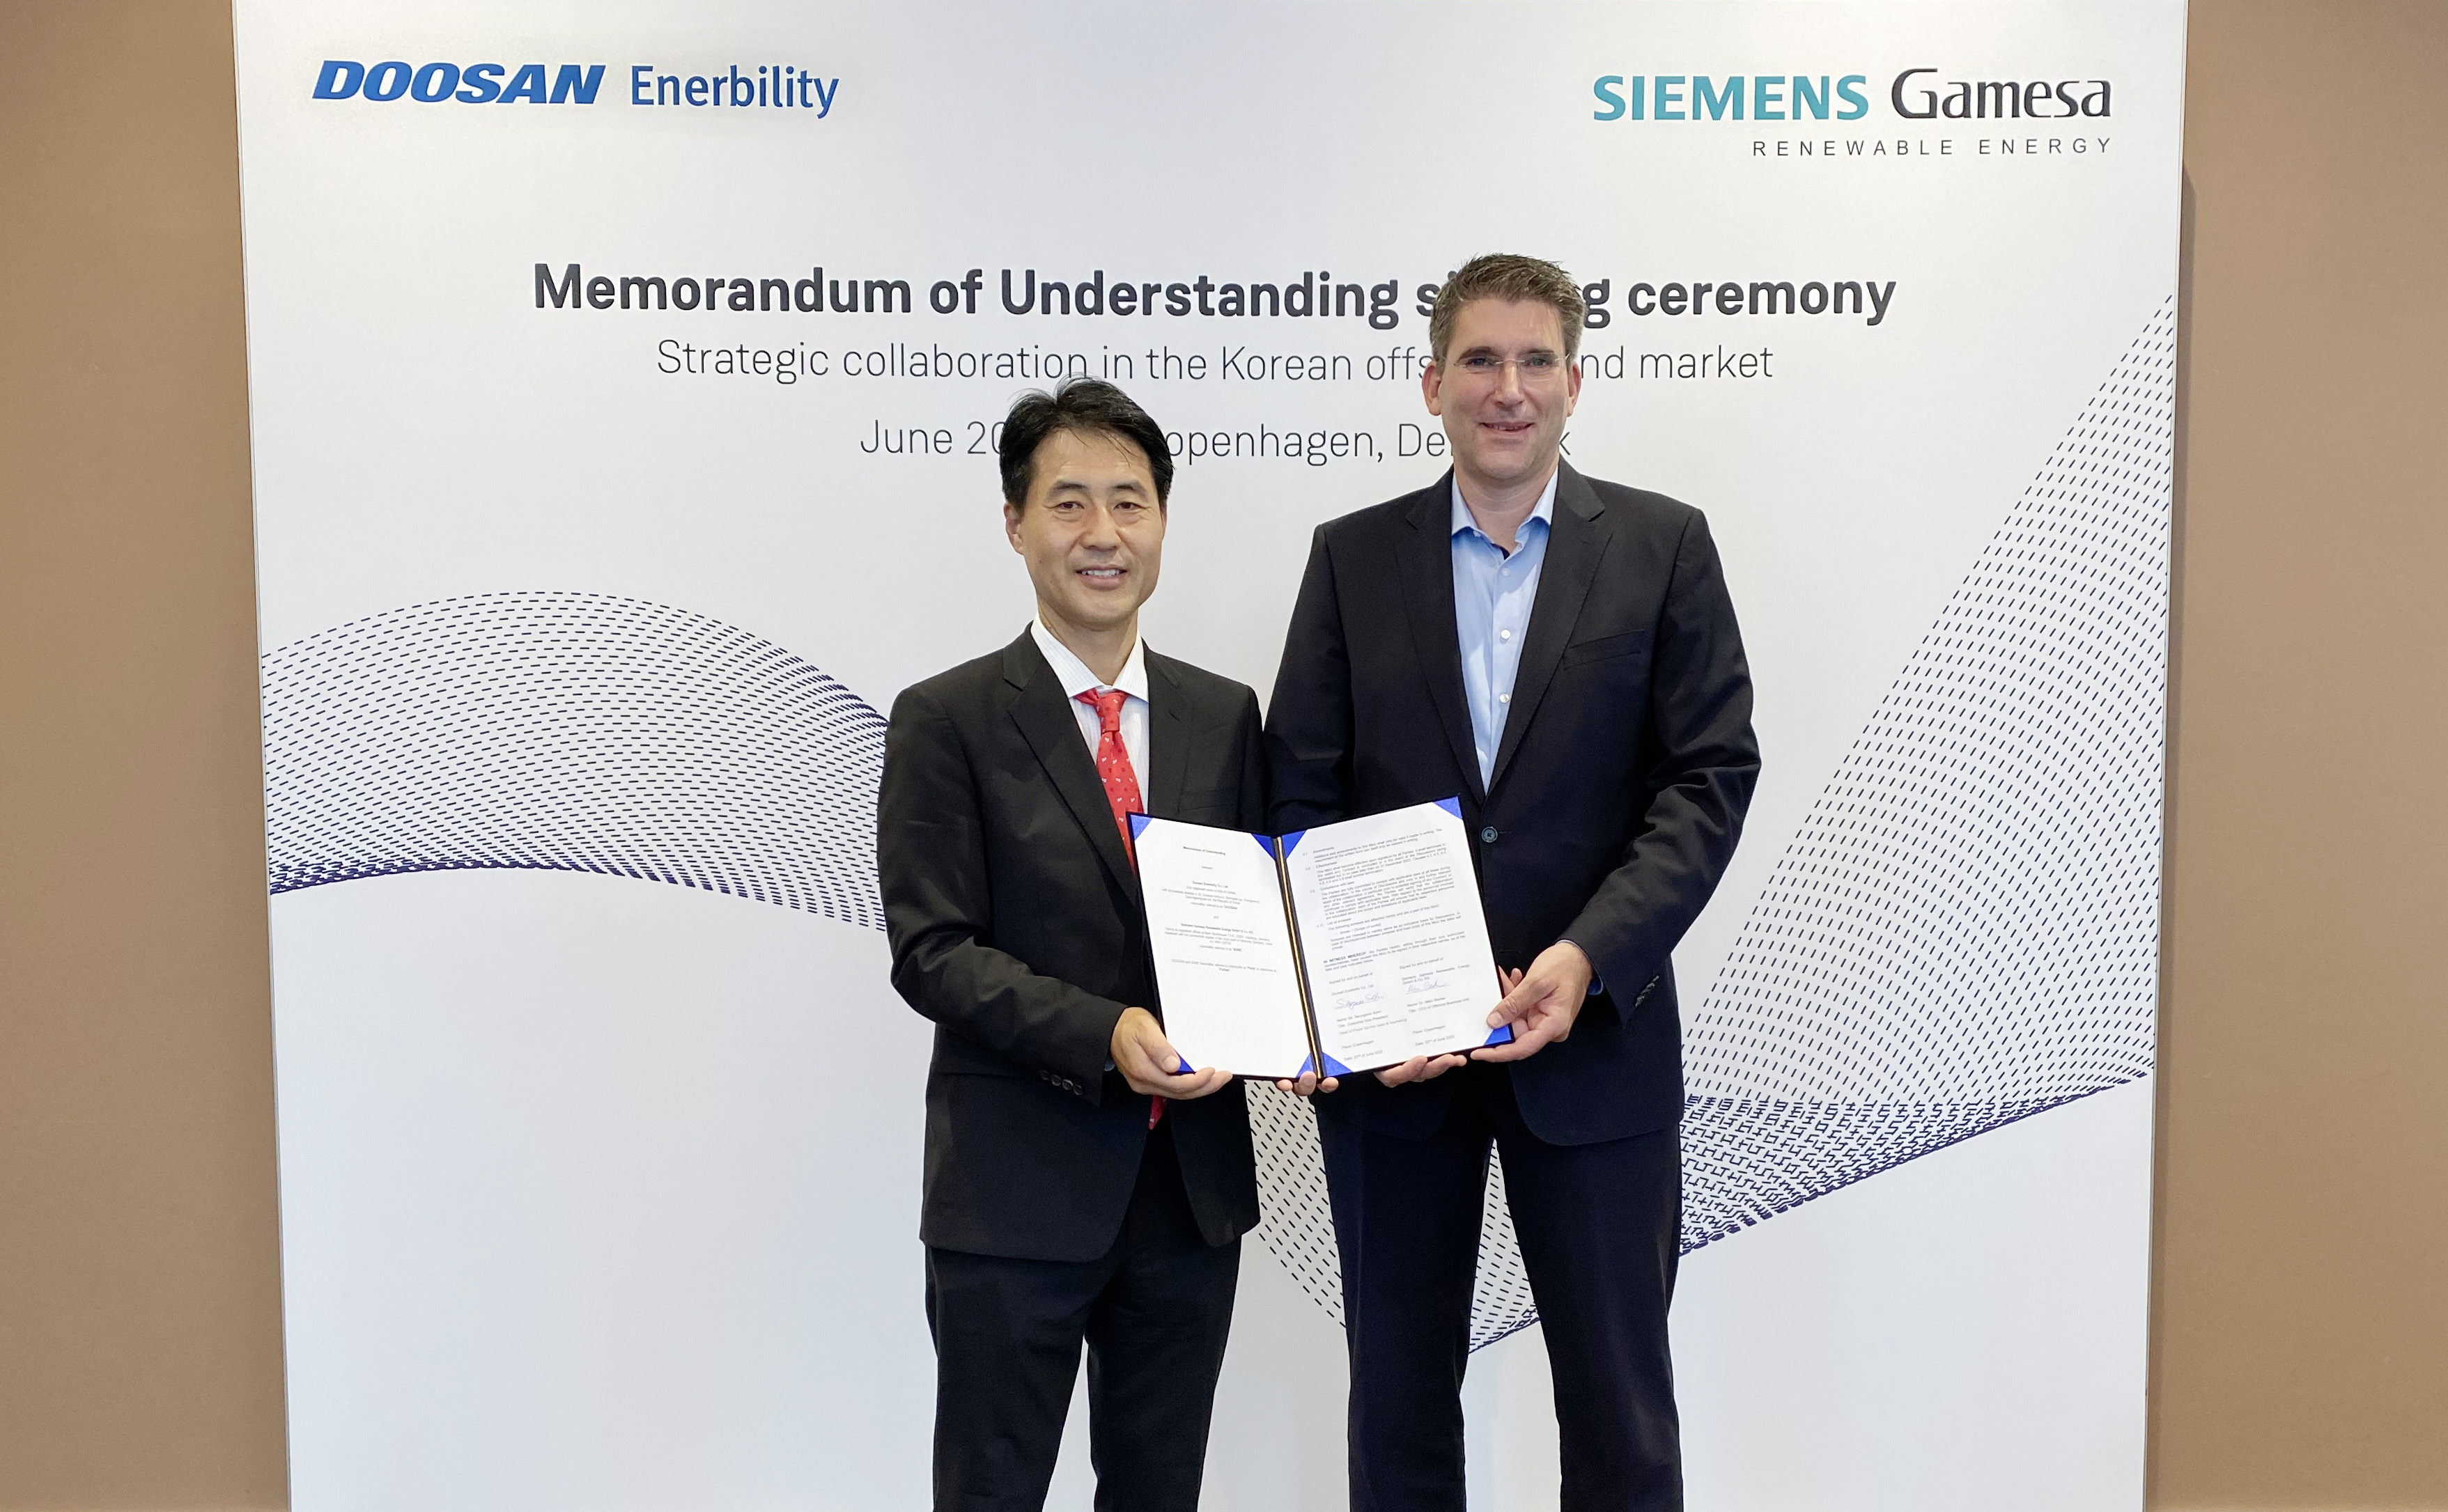 Seungwoo Sohn, SVP of Doosan Enerbility’s Power Services Sales & Marketing (on the left) and Marc Becker, CEO of Siemens Gamesa Offshore Business Unit, pose for a photo at the signing ceremony of the “MoU on Strategic Cooperation for Korean Offshore Wind Power Market” held in Copenhagen, Denmark.